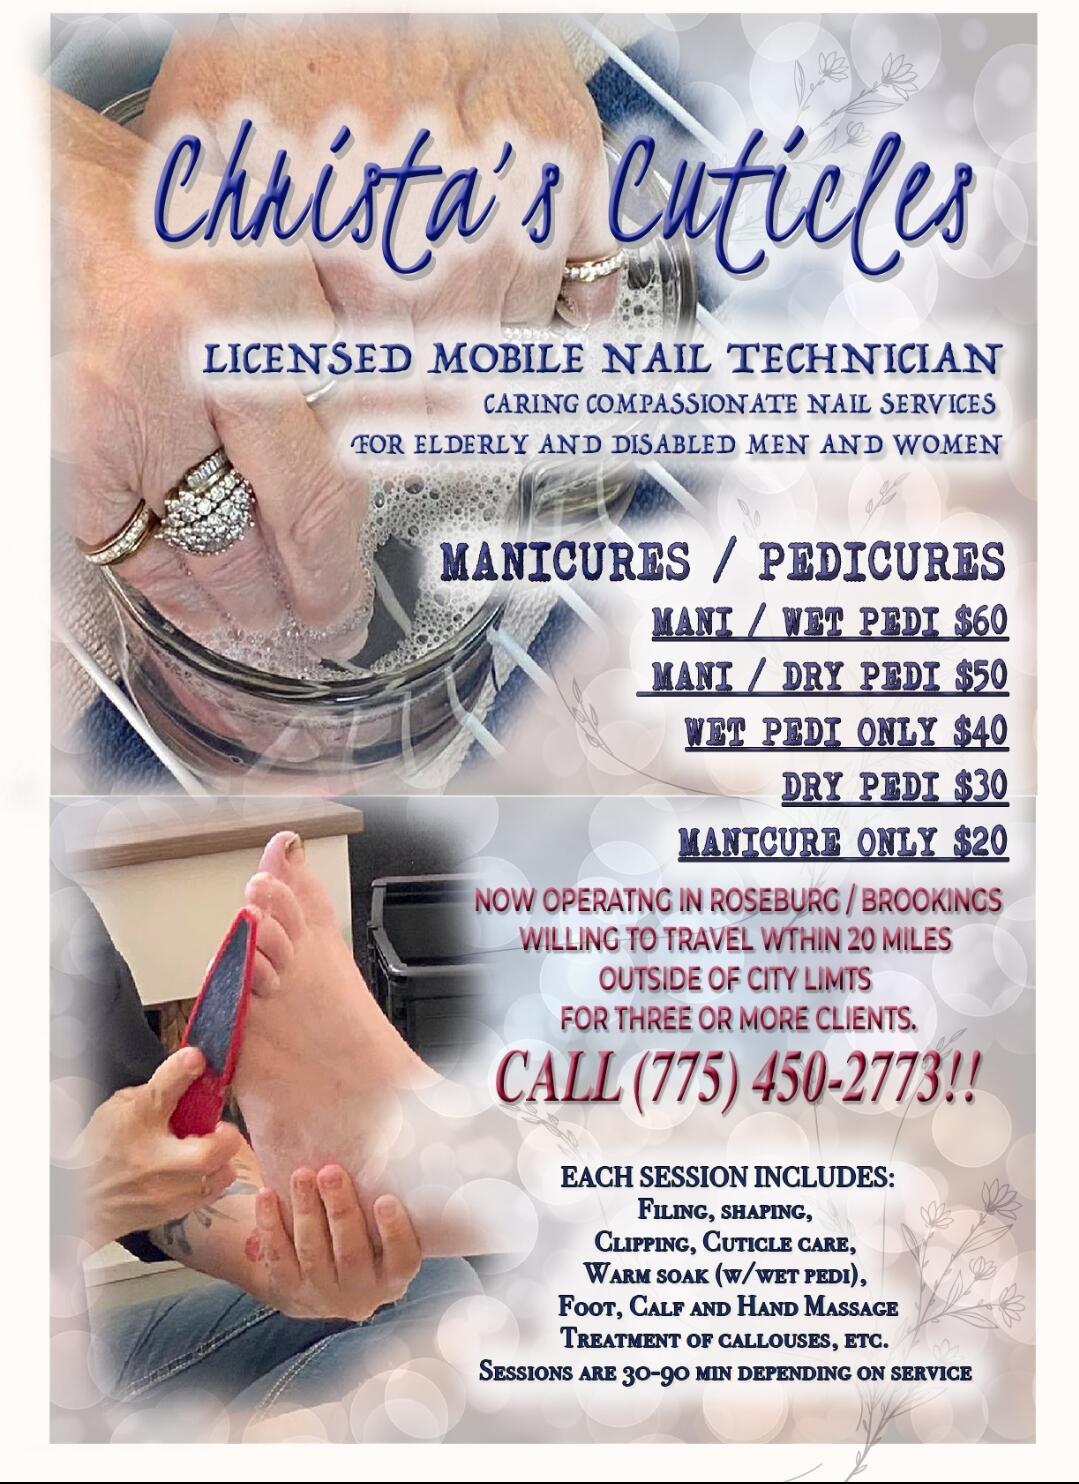 Flawless Nails - Mobile Nail Technician | Worthing | Facebook